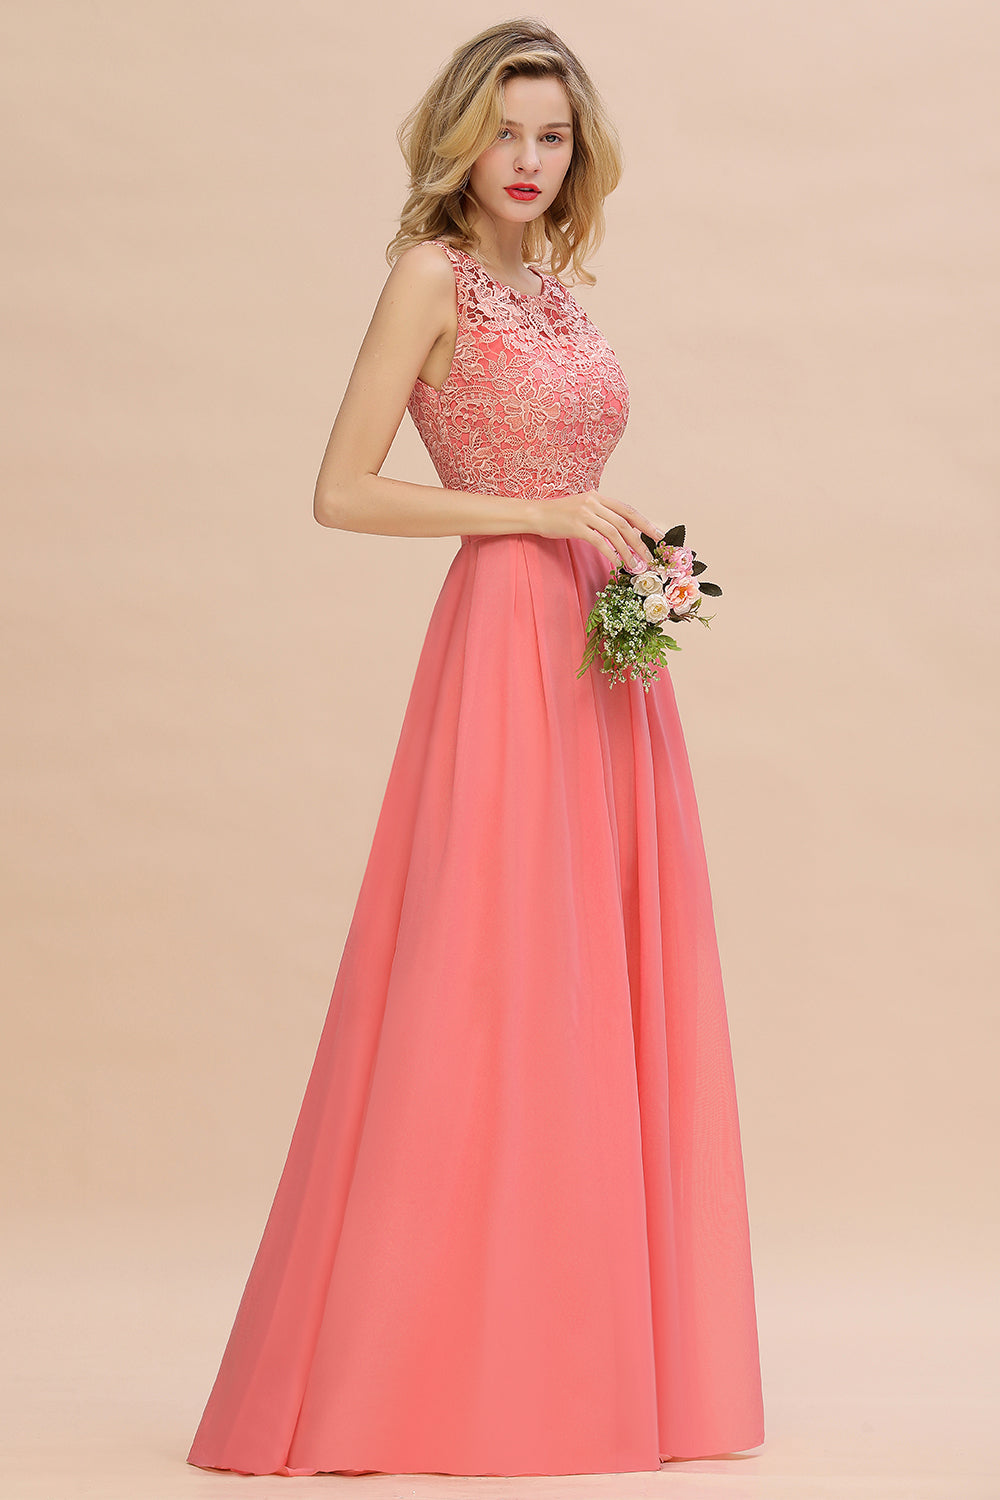 Exquisite Lace Scoop Sleeveless Bridesmaid Dresses Online with Ruffle-27dress